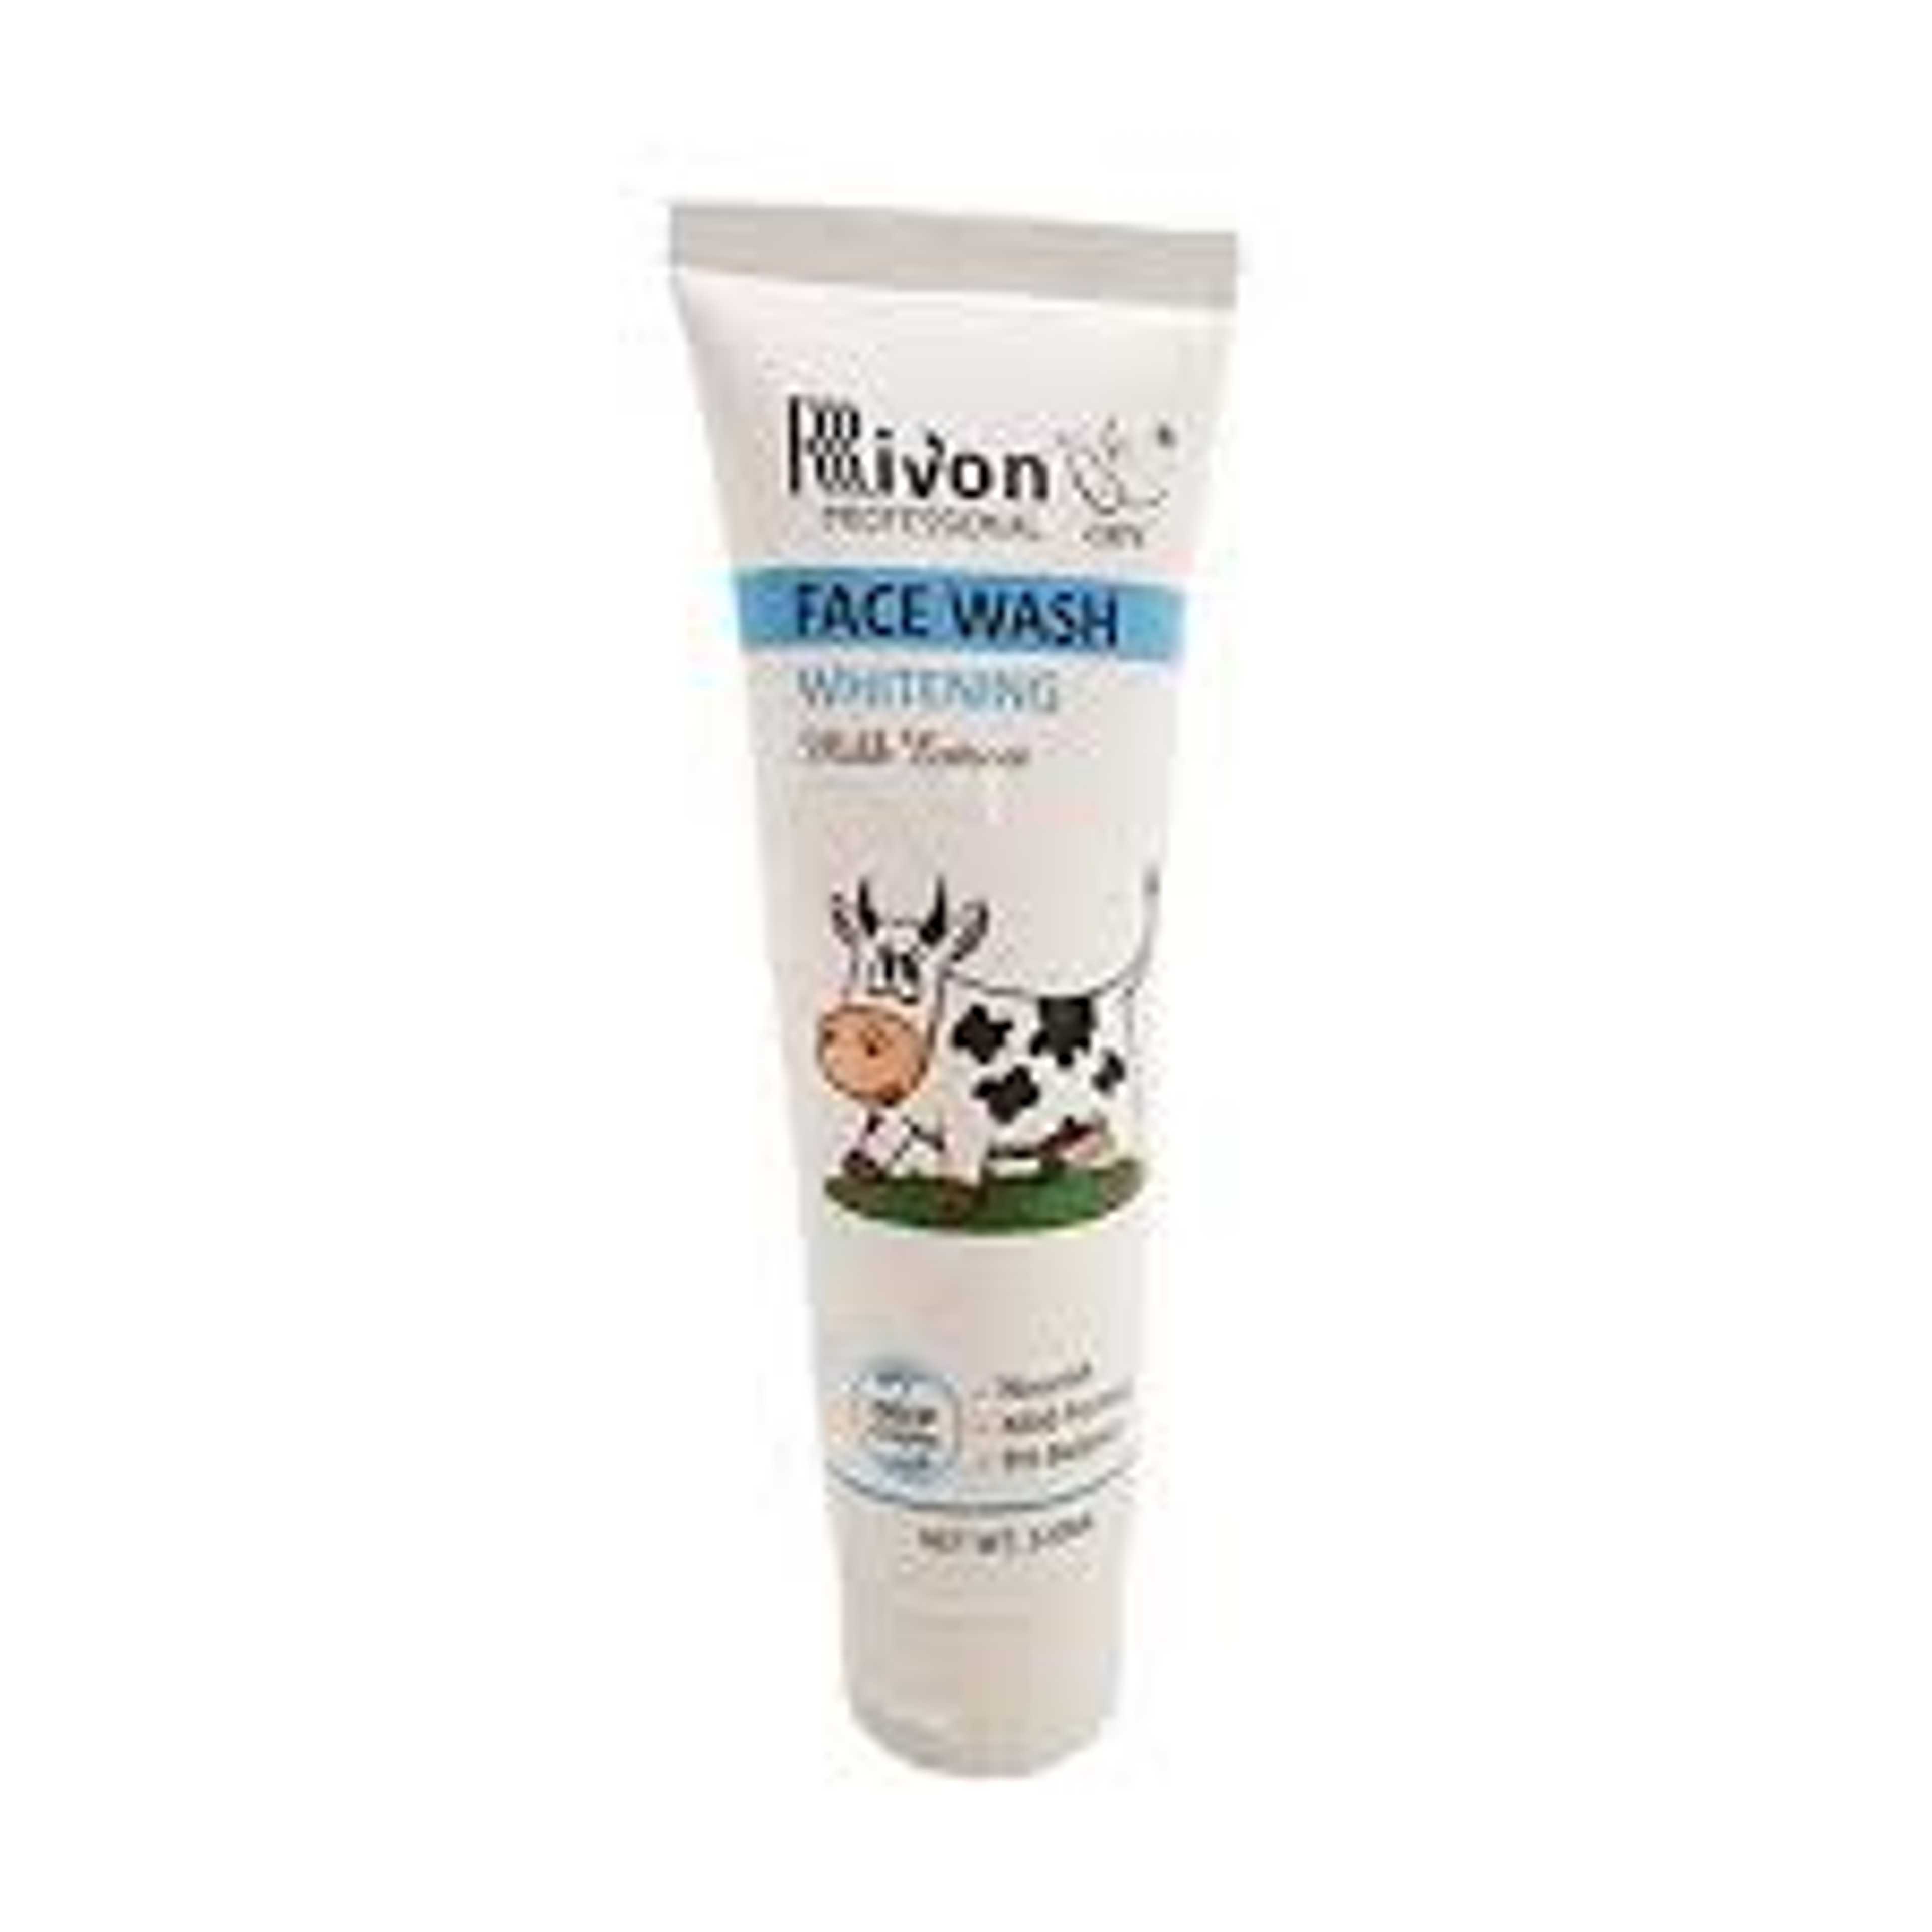 RIVON FACE WASH WHITING MILK EXTRACT - DEEP CLEASING